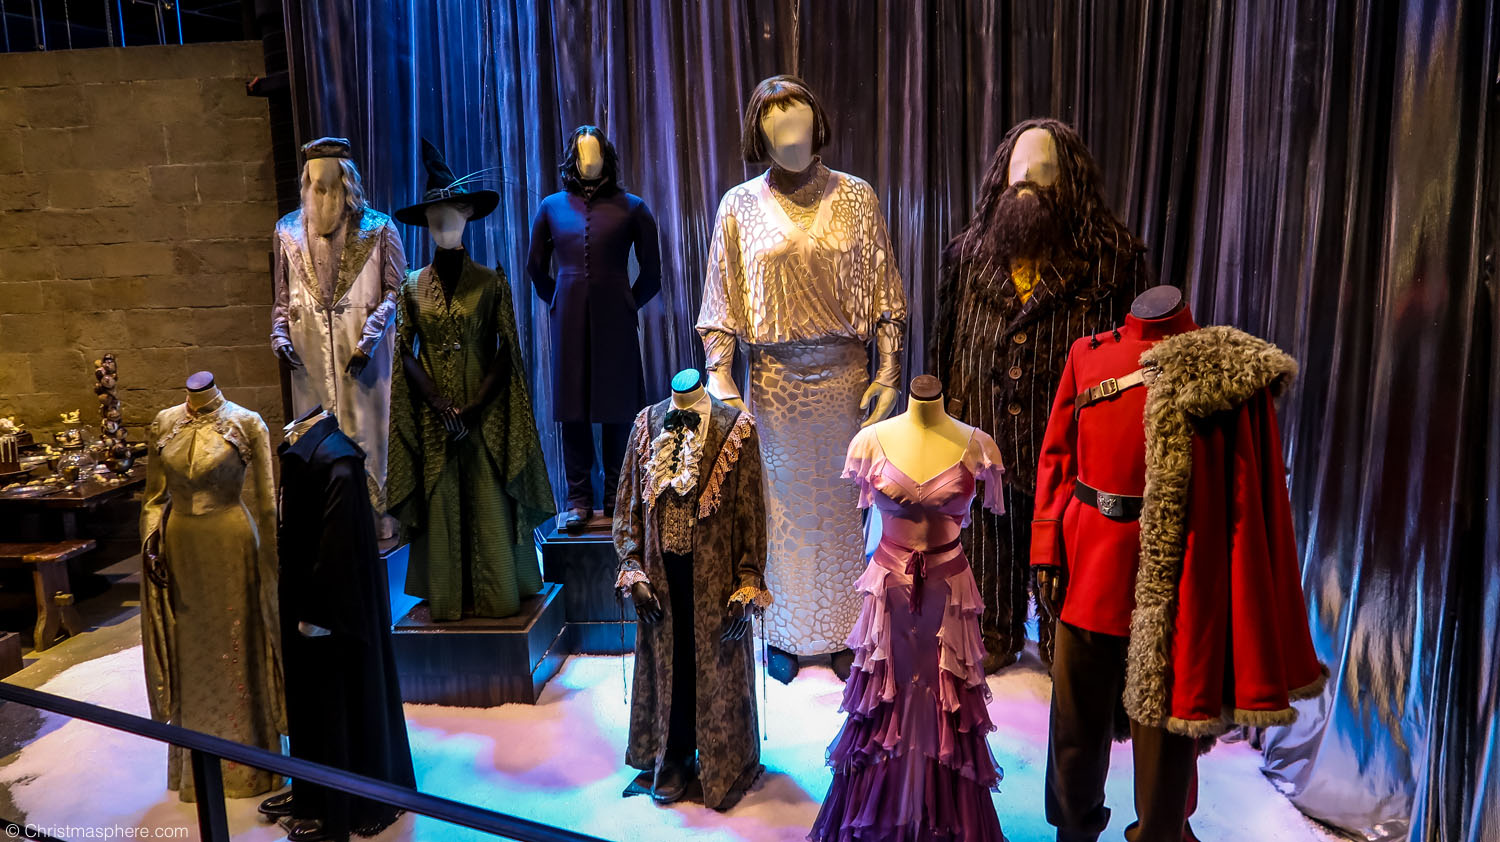 The Yule Ball Costumes